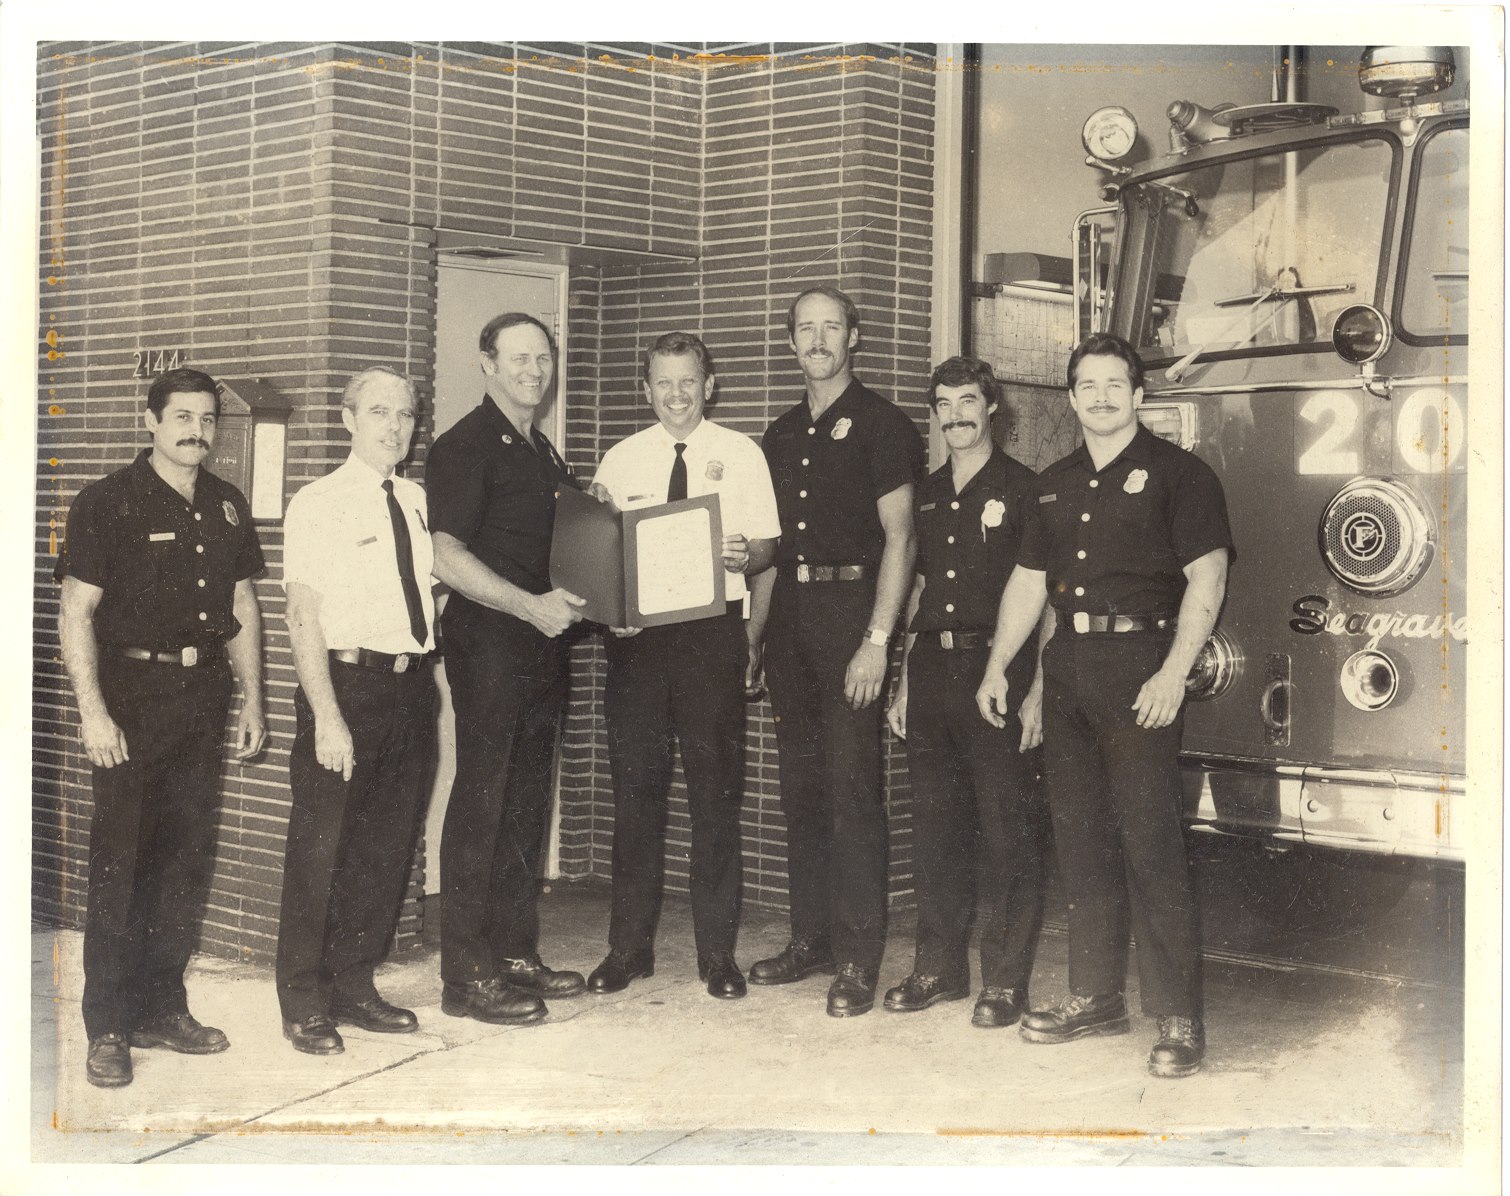 Group of firefighters with Frank Borden in the middle 